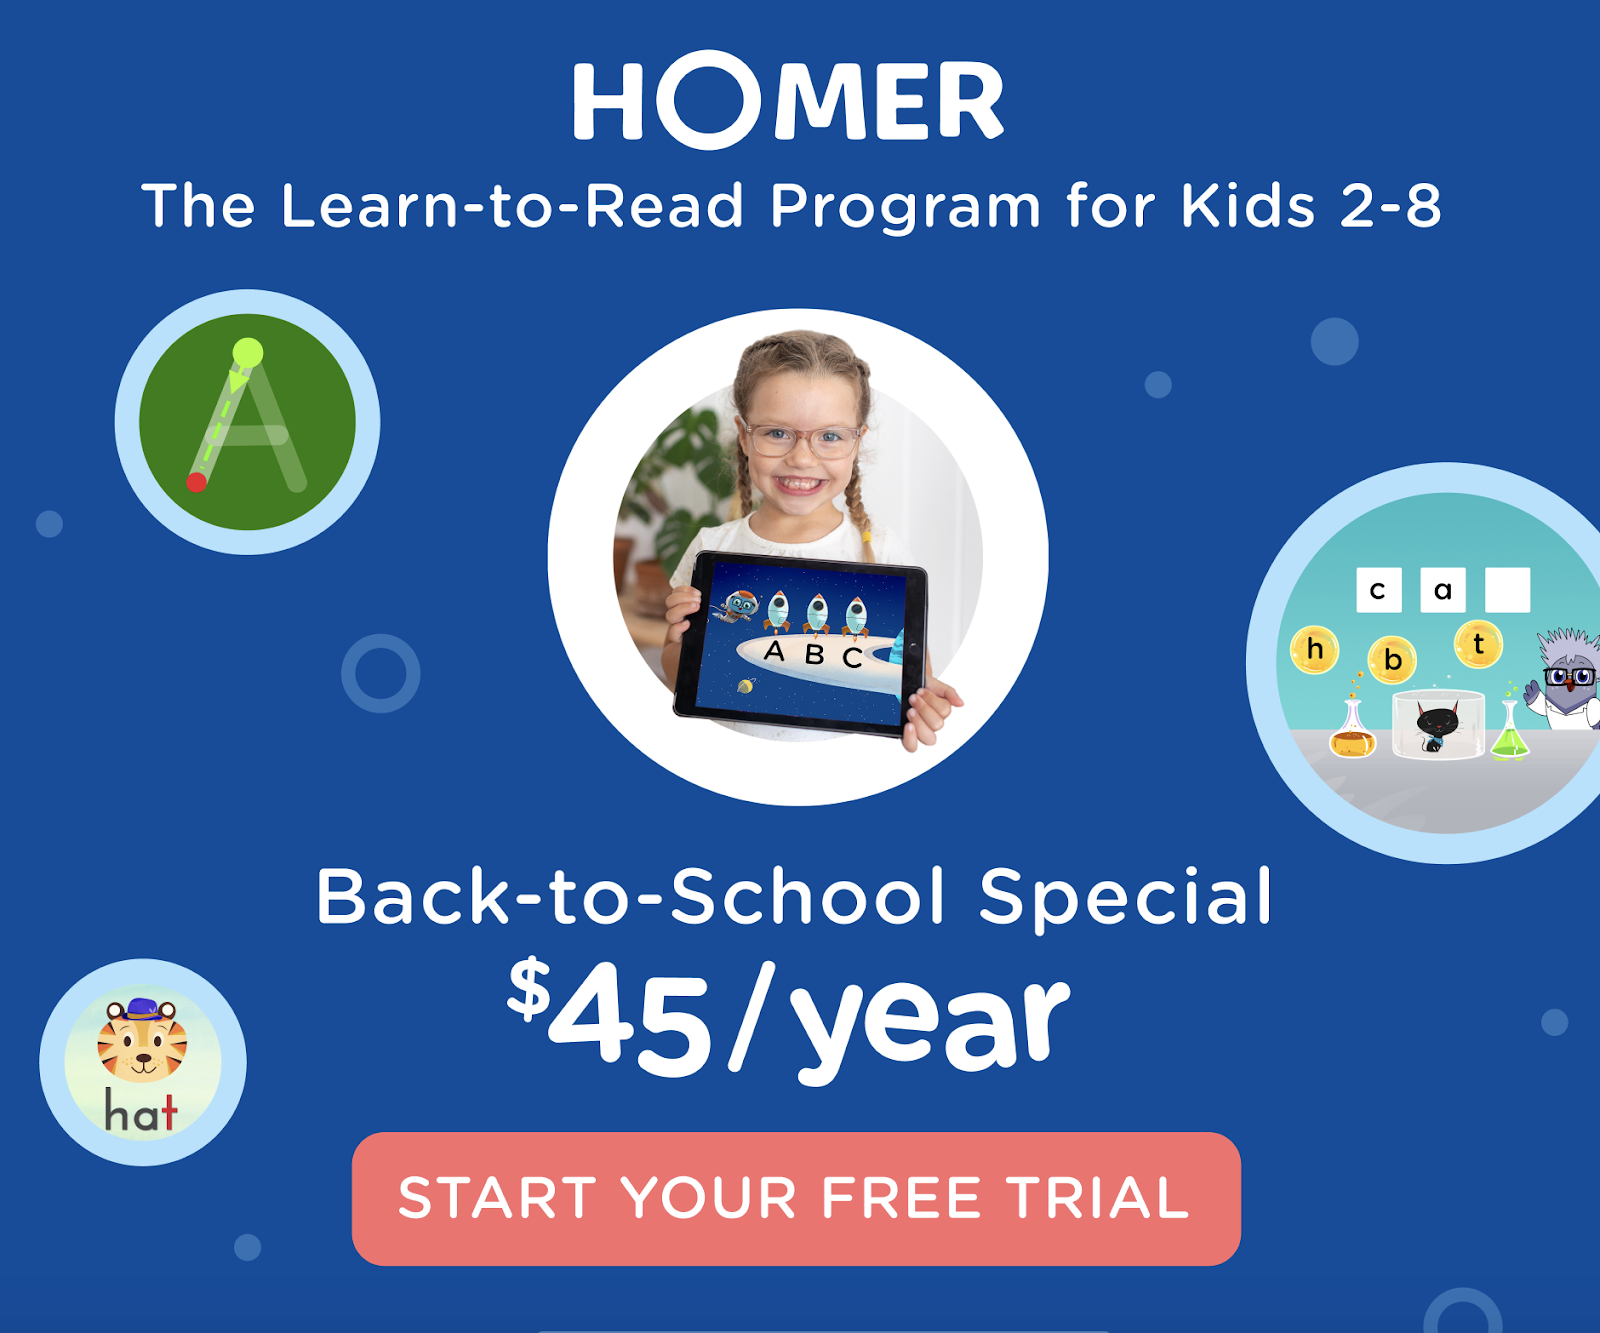 The HOMER learn-to-read program is offering a back-to school special. Click here to learn more. 